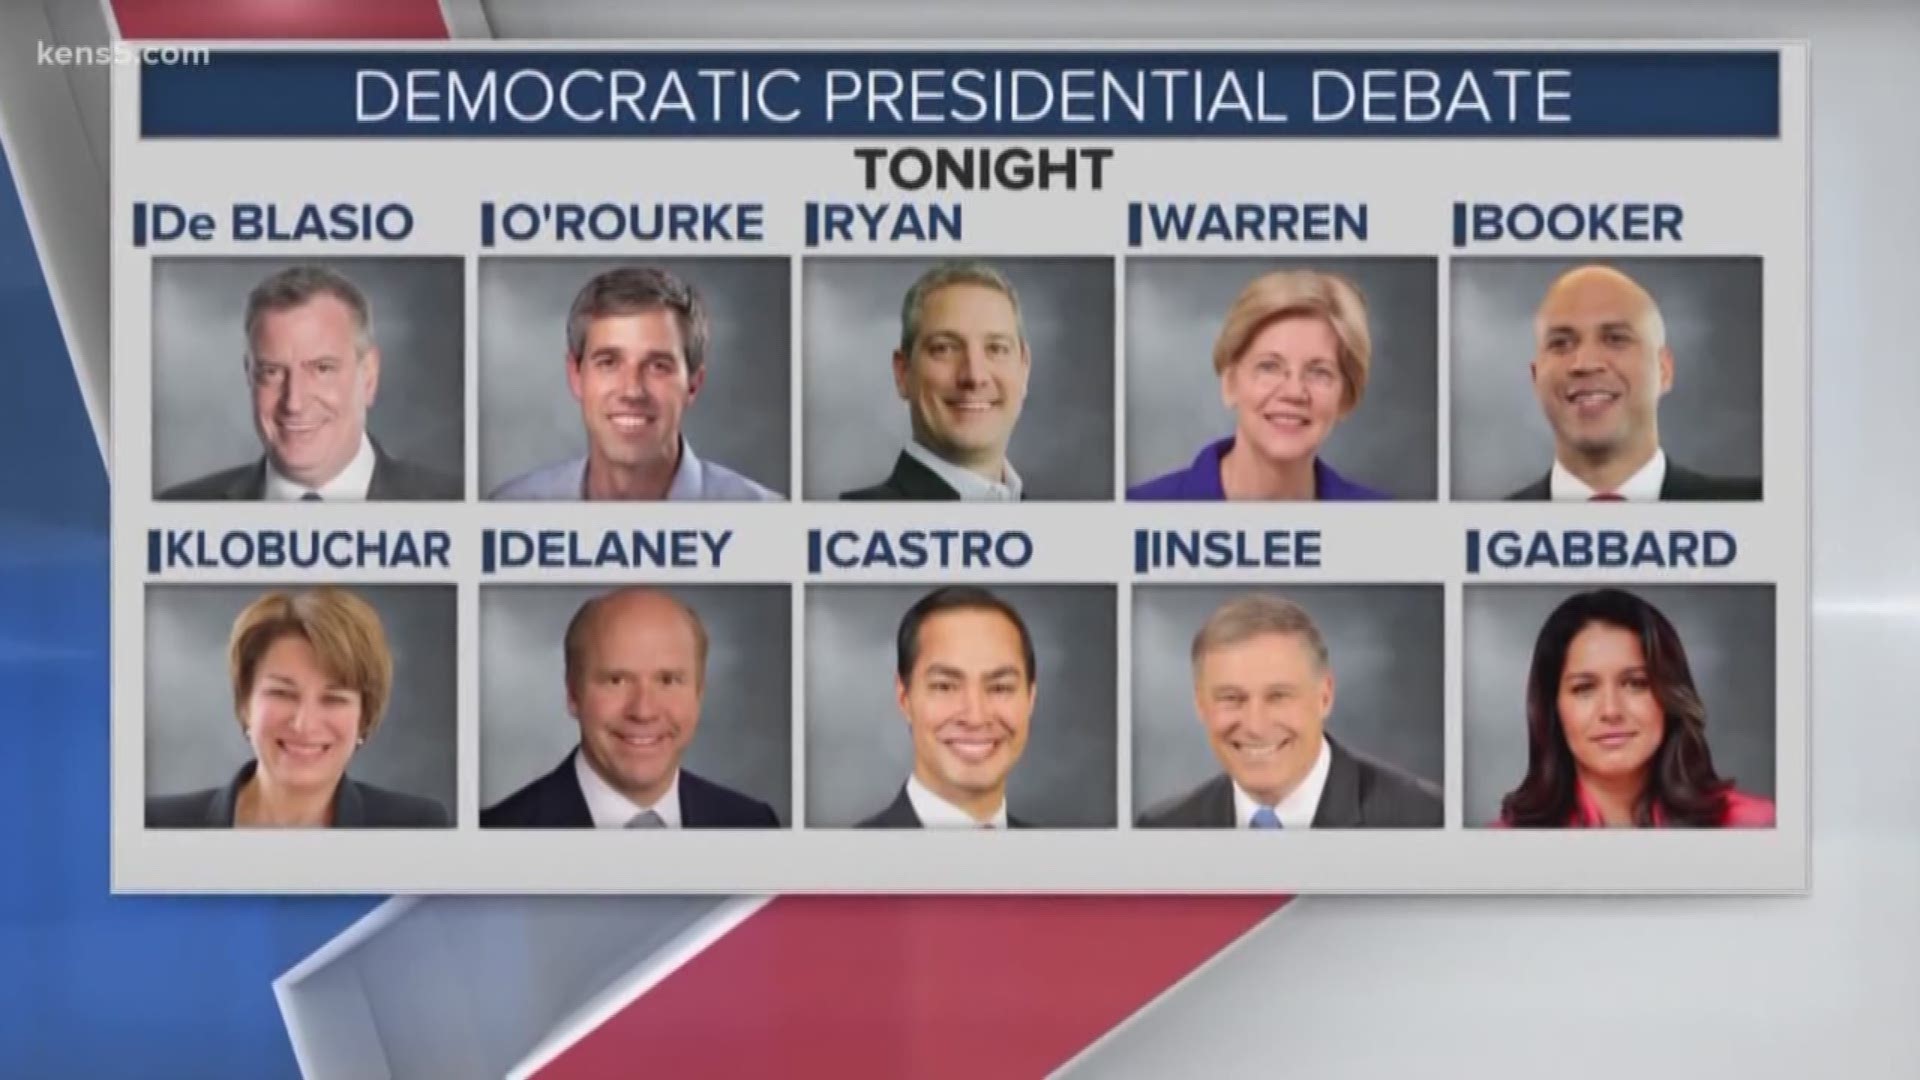 Beto O'Rourke and Julian Castro are part of the first group of Democratic presidential candidates set to debate this week in Miami.